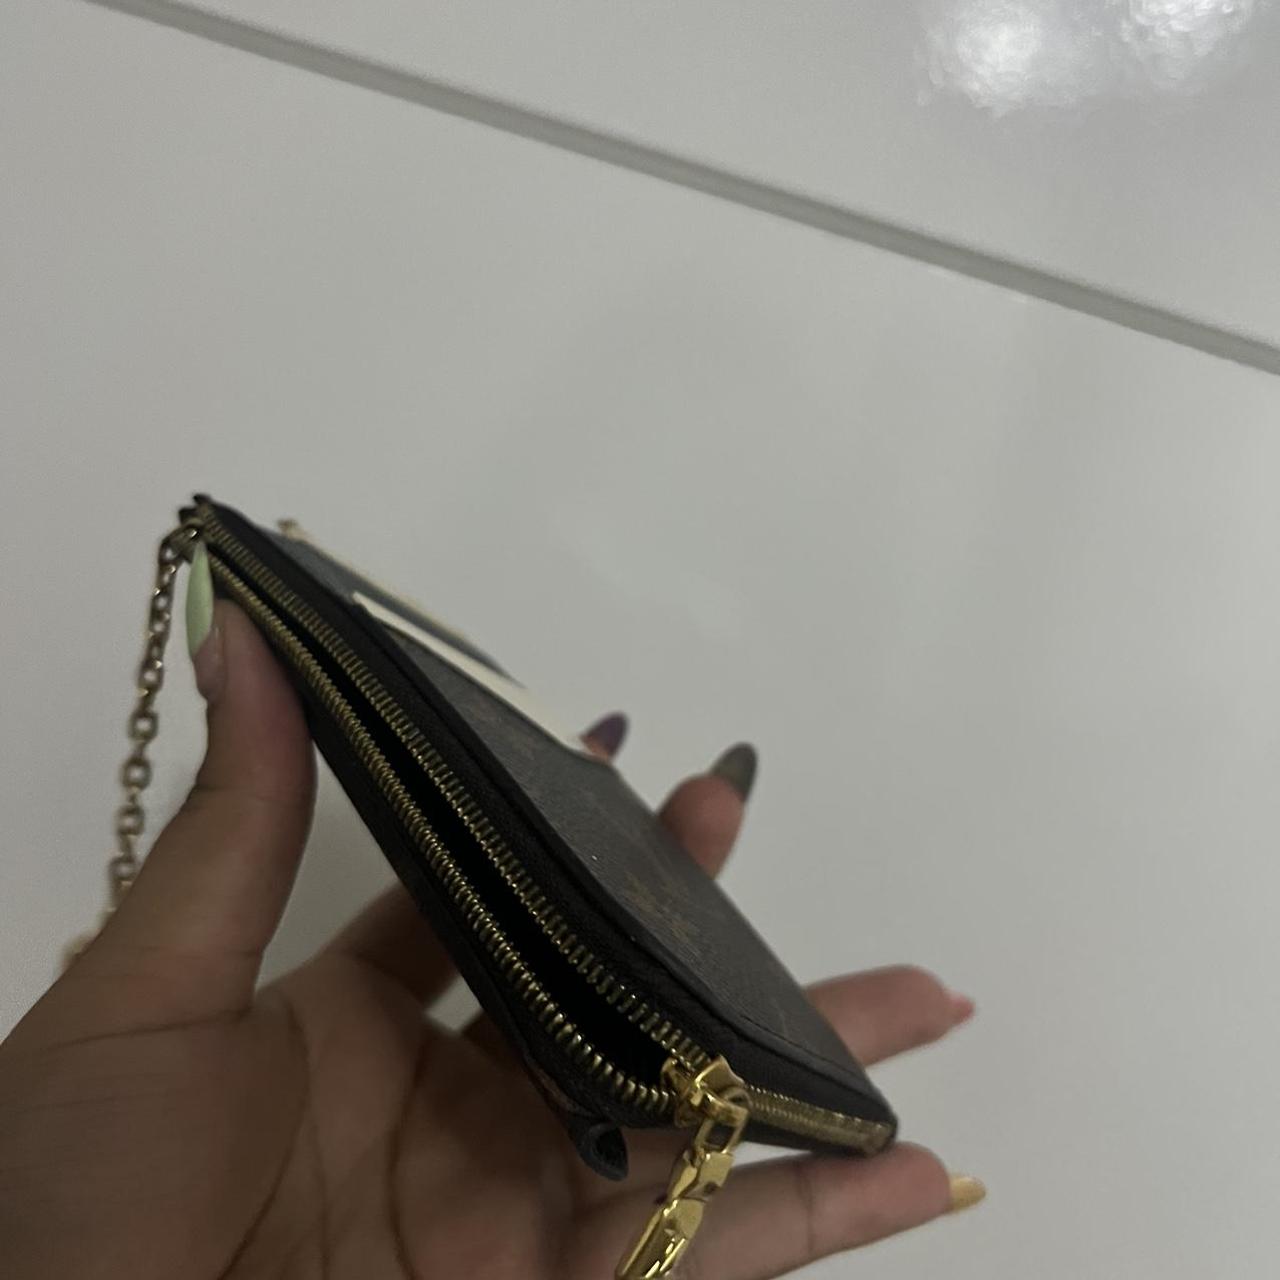 Louis Vuitton Card Holder Recto Verso Bought at the - Depop